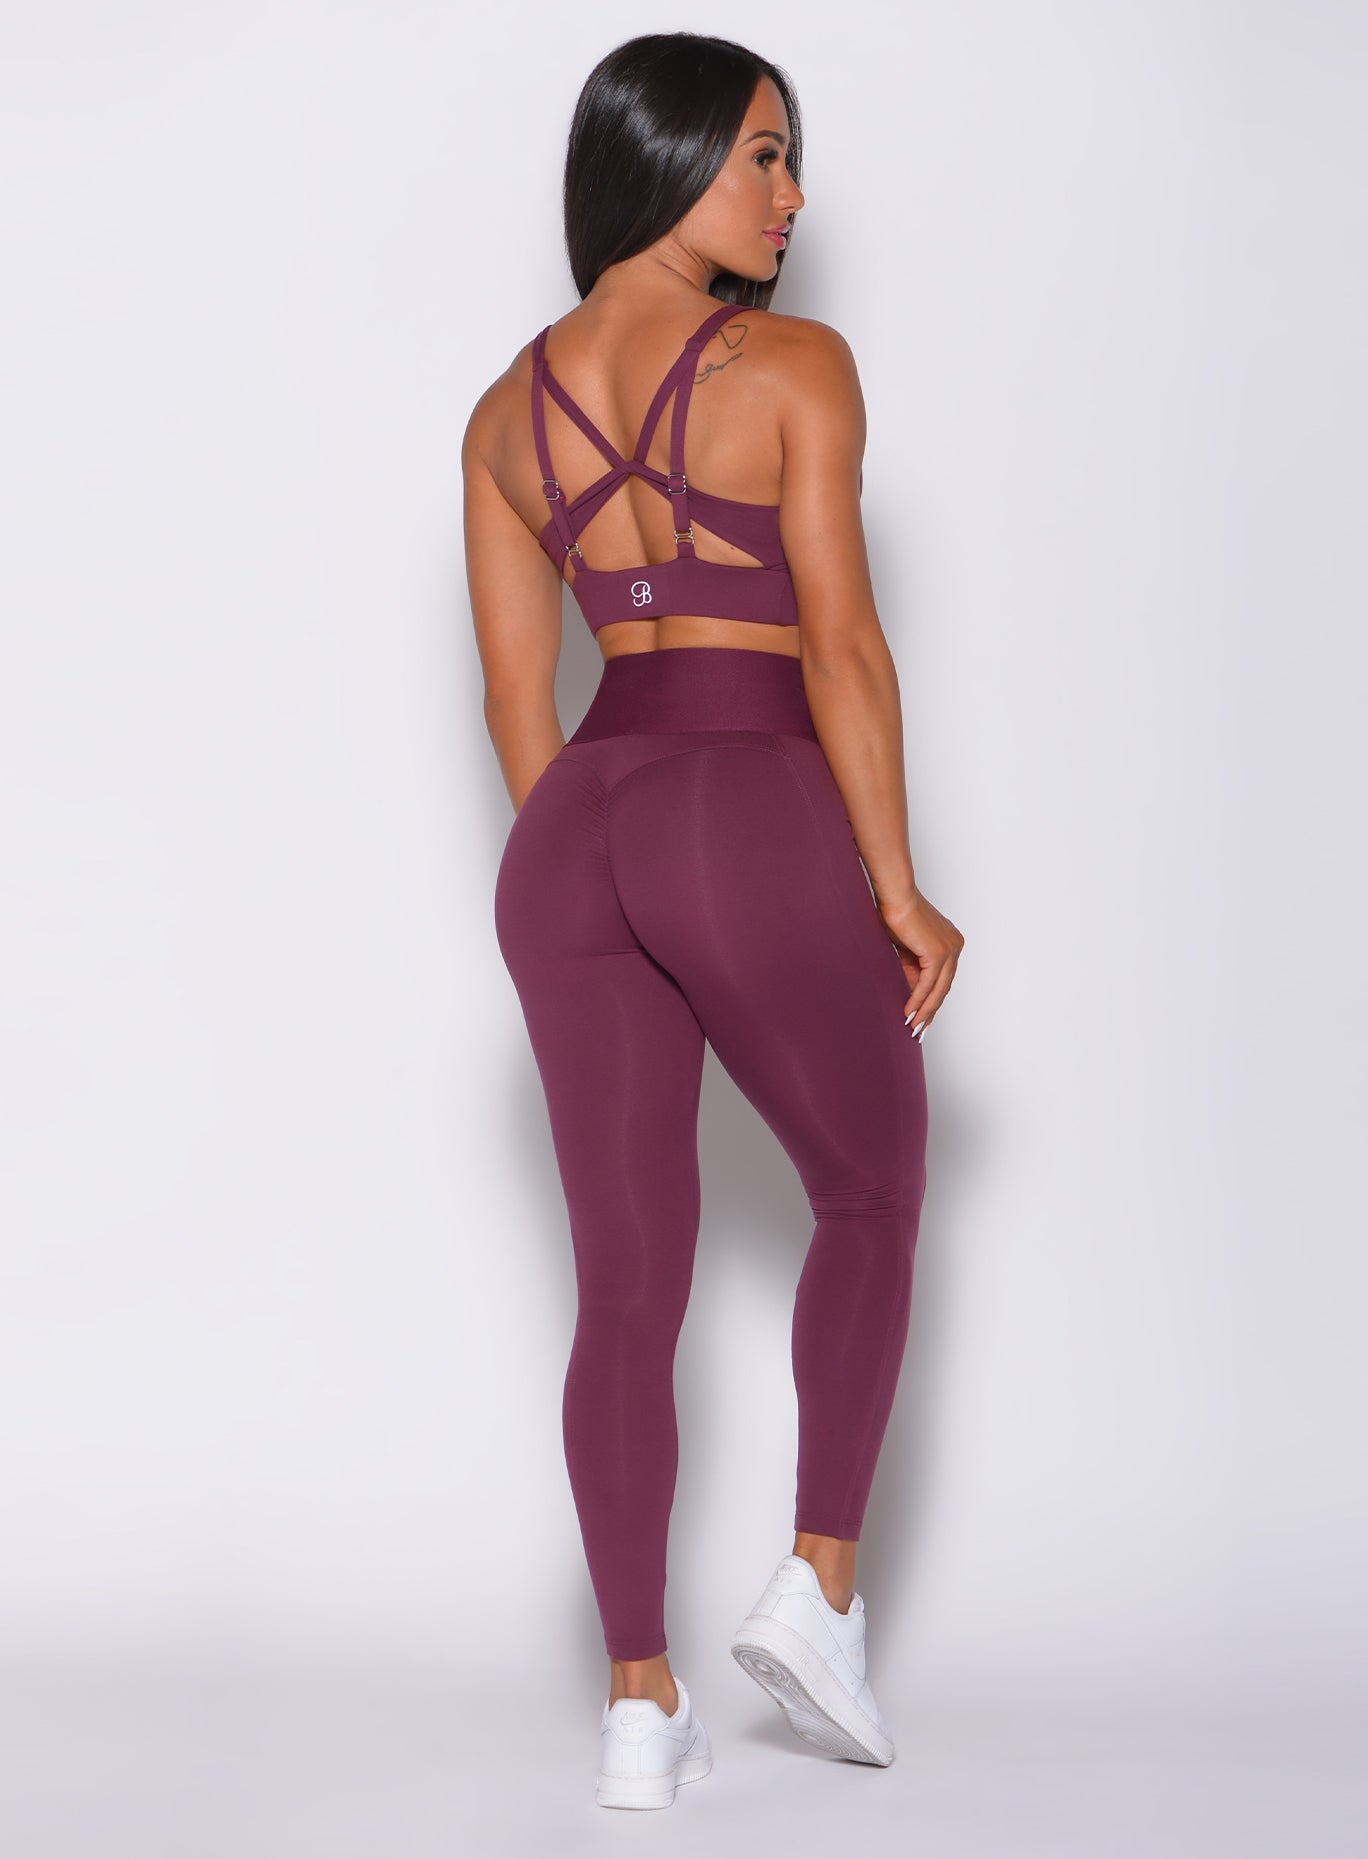 Back profile view of a model wearing our waist cincher leggings in majestic purple color and a matching sports bra